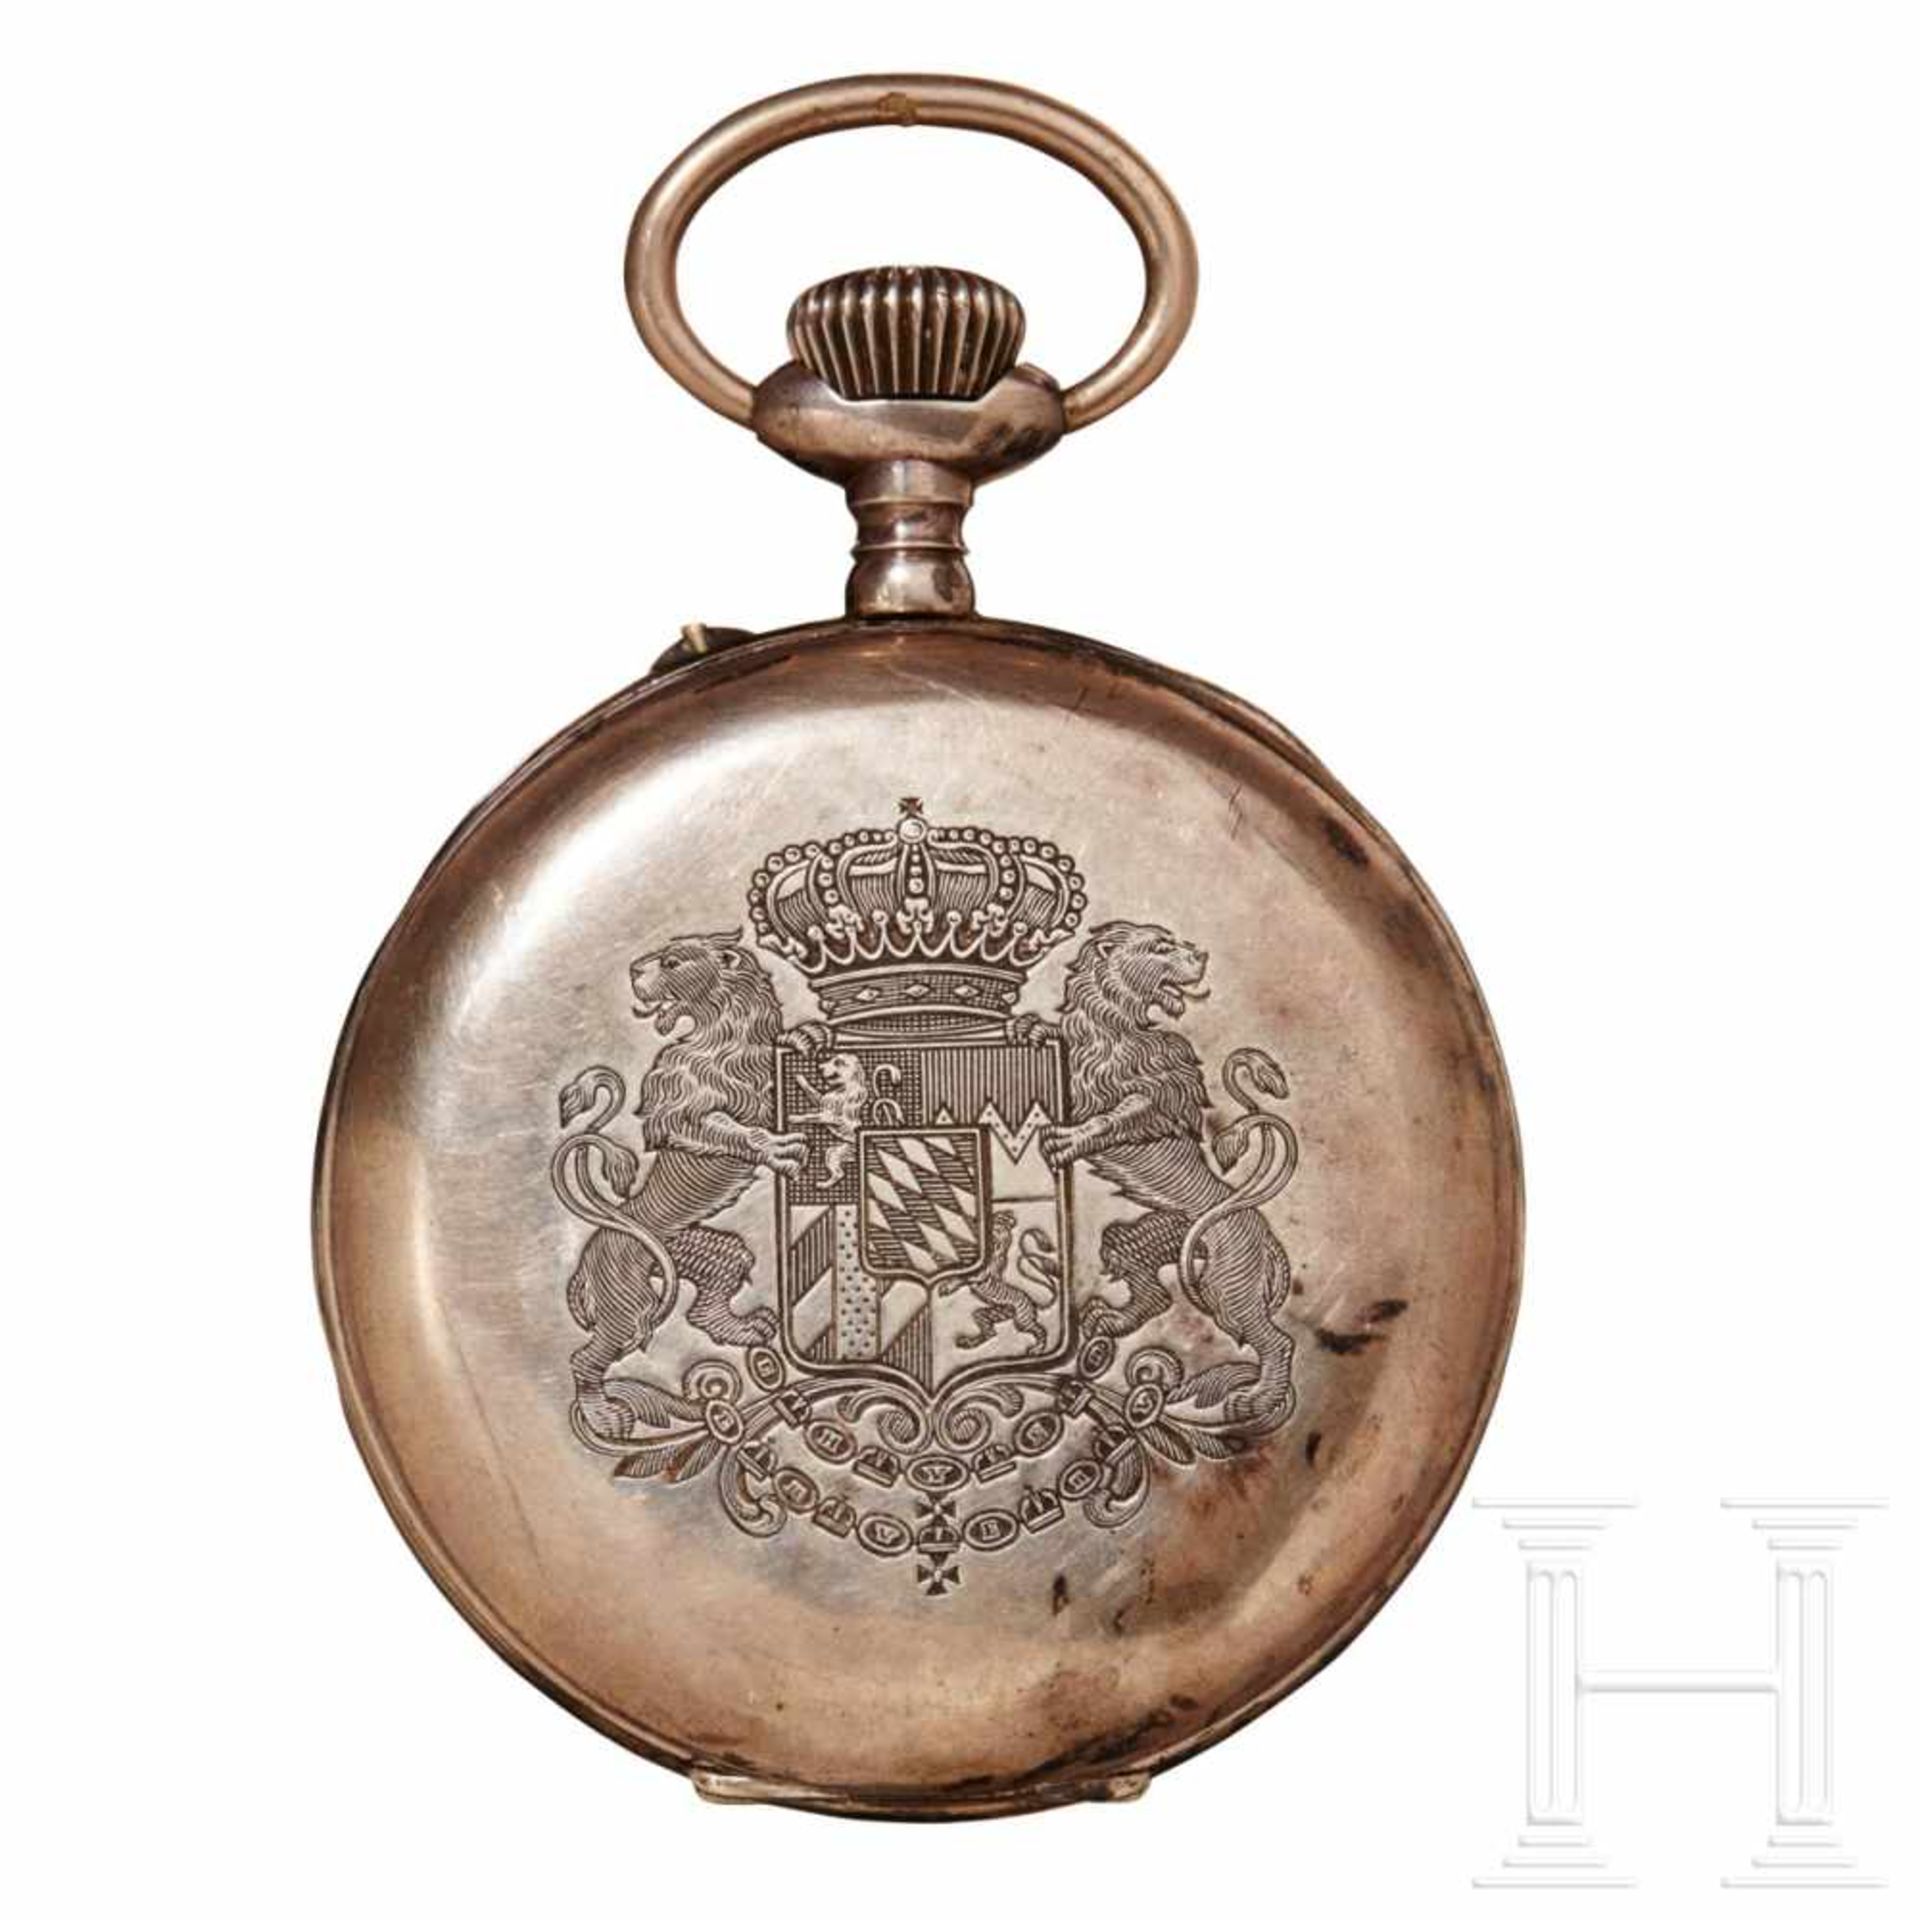 A Bavarian Pocket WatchLarge, silver pocket watch with engraved Royal Bavarian Coat of Arms. A watch